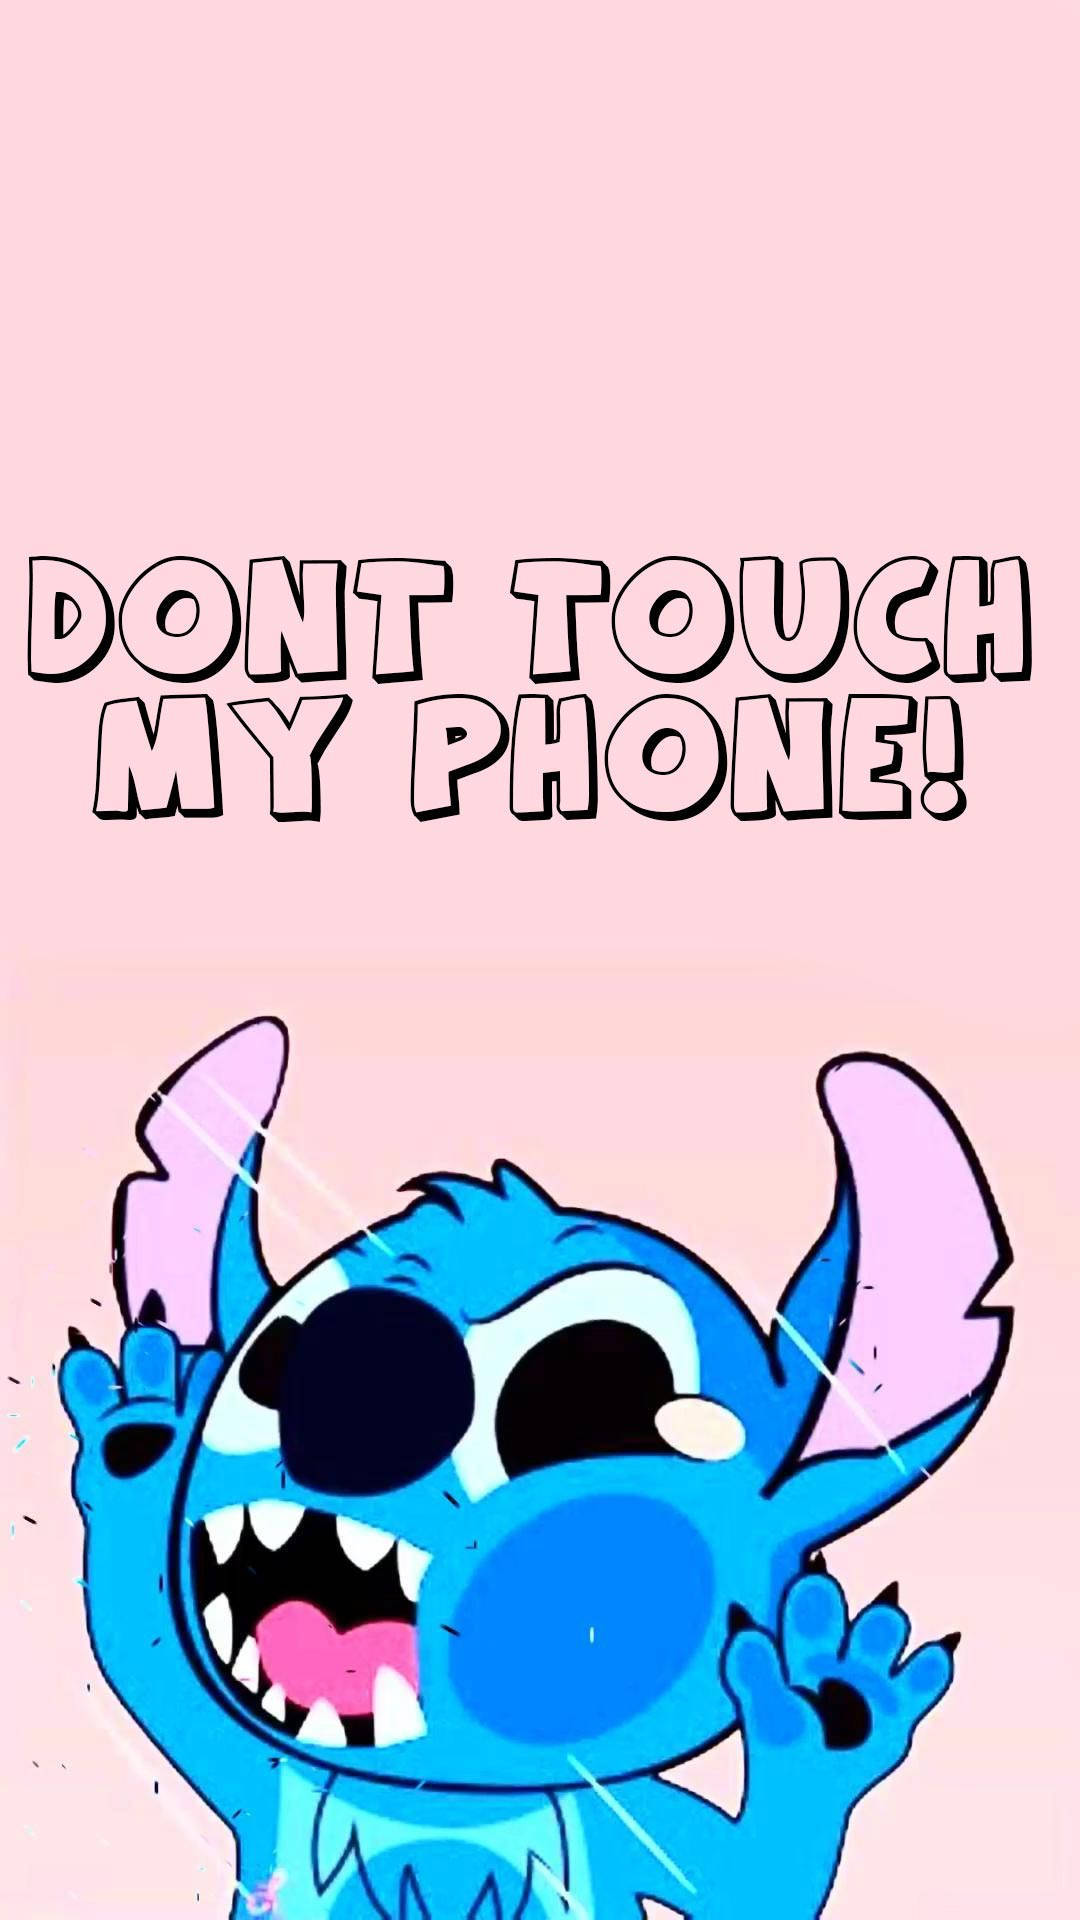 200+] Dont Touch My Phone Wallpapers | Wallpapers.com